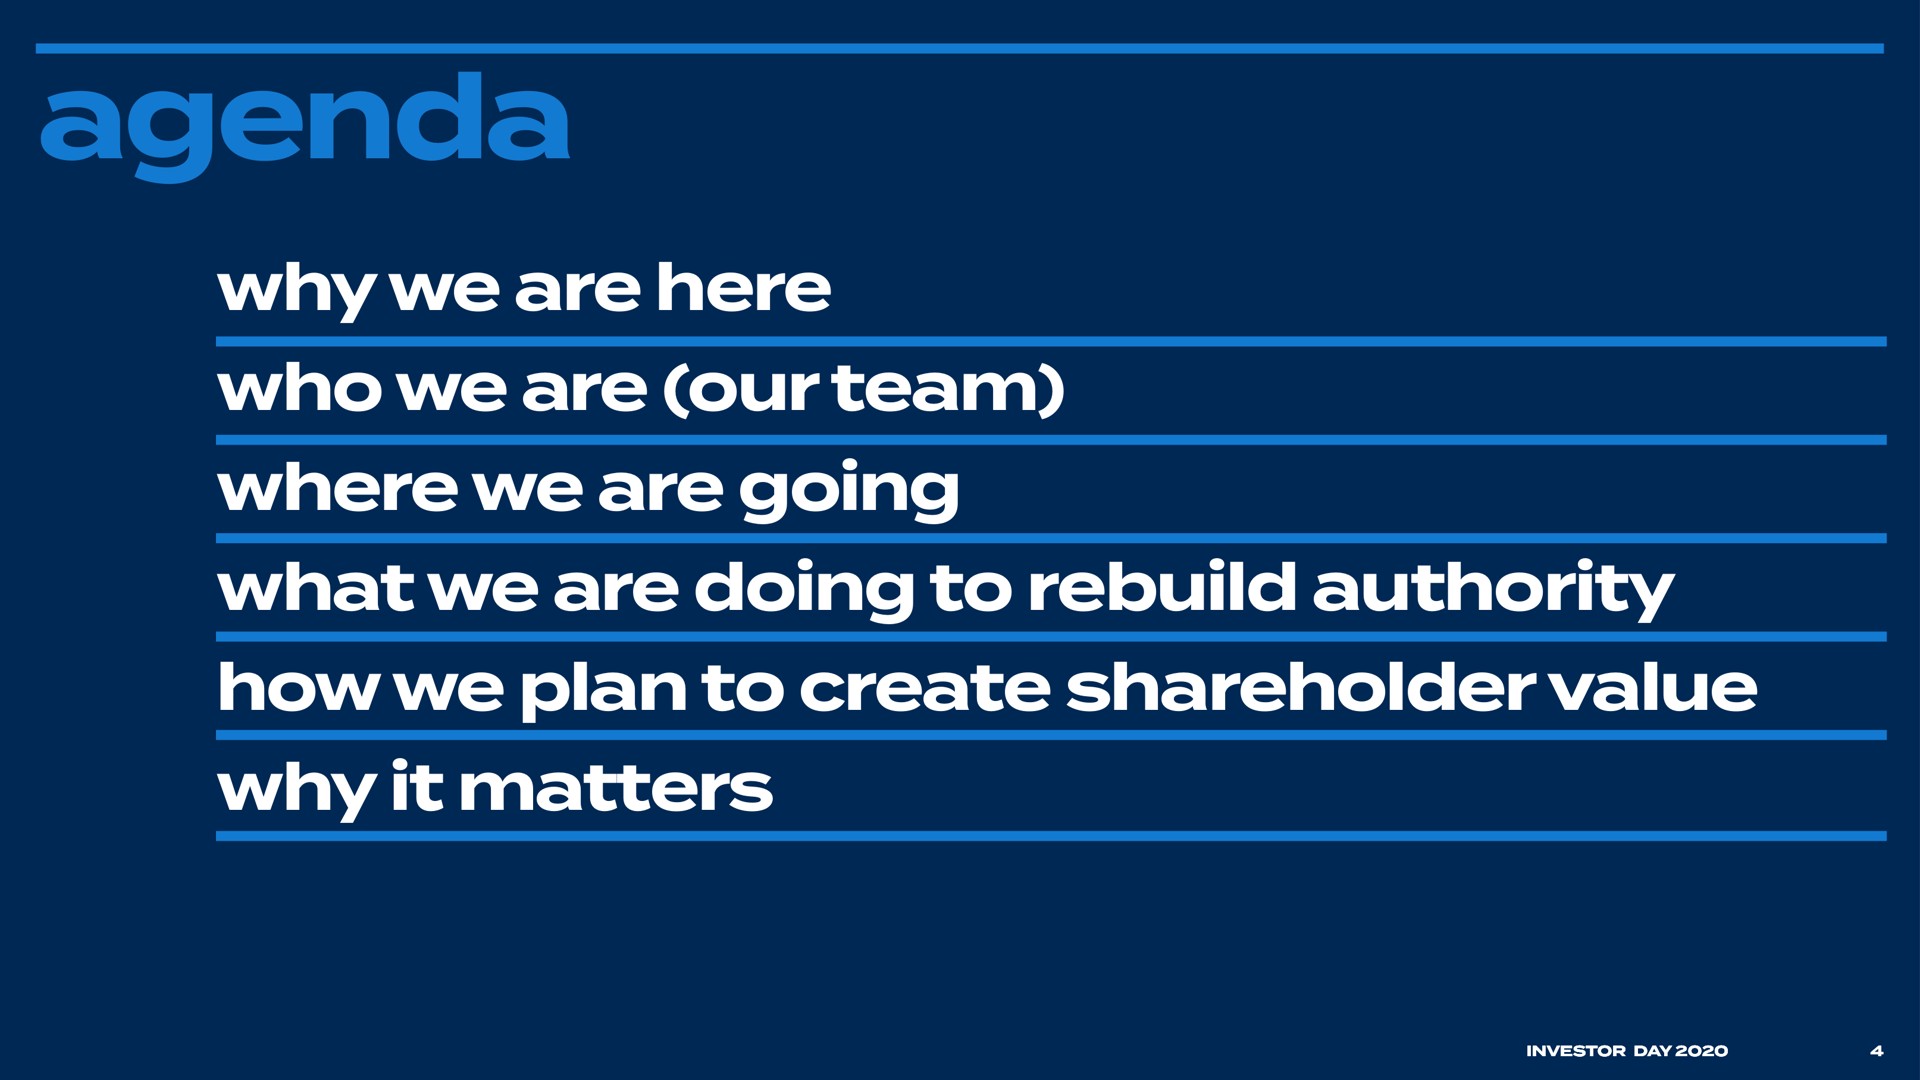 agenda why we are here who we are our team where we are going what we are doing to rebuild authority how we plan to create shareholder value why it matters | Bed Bath & Beyond